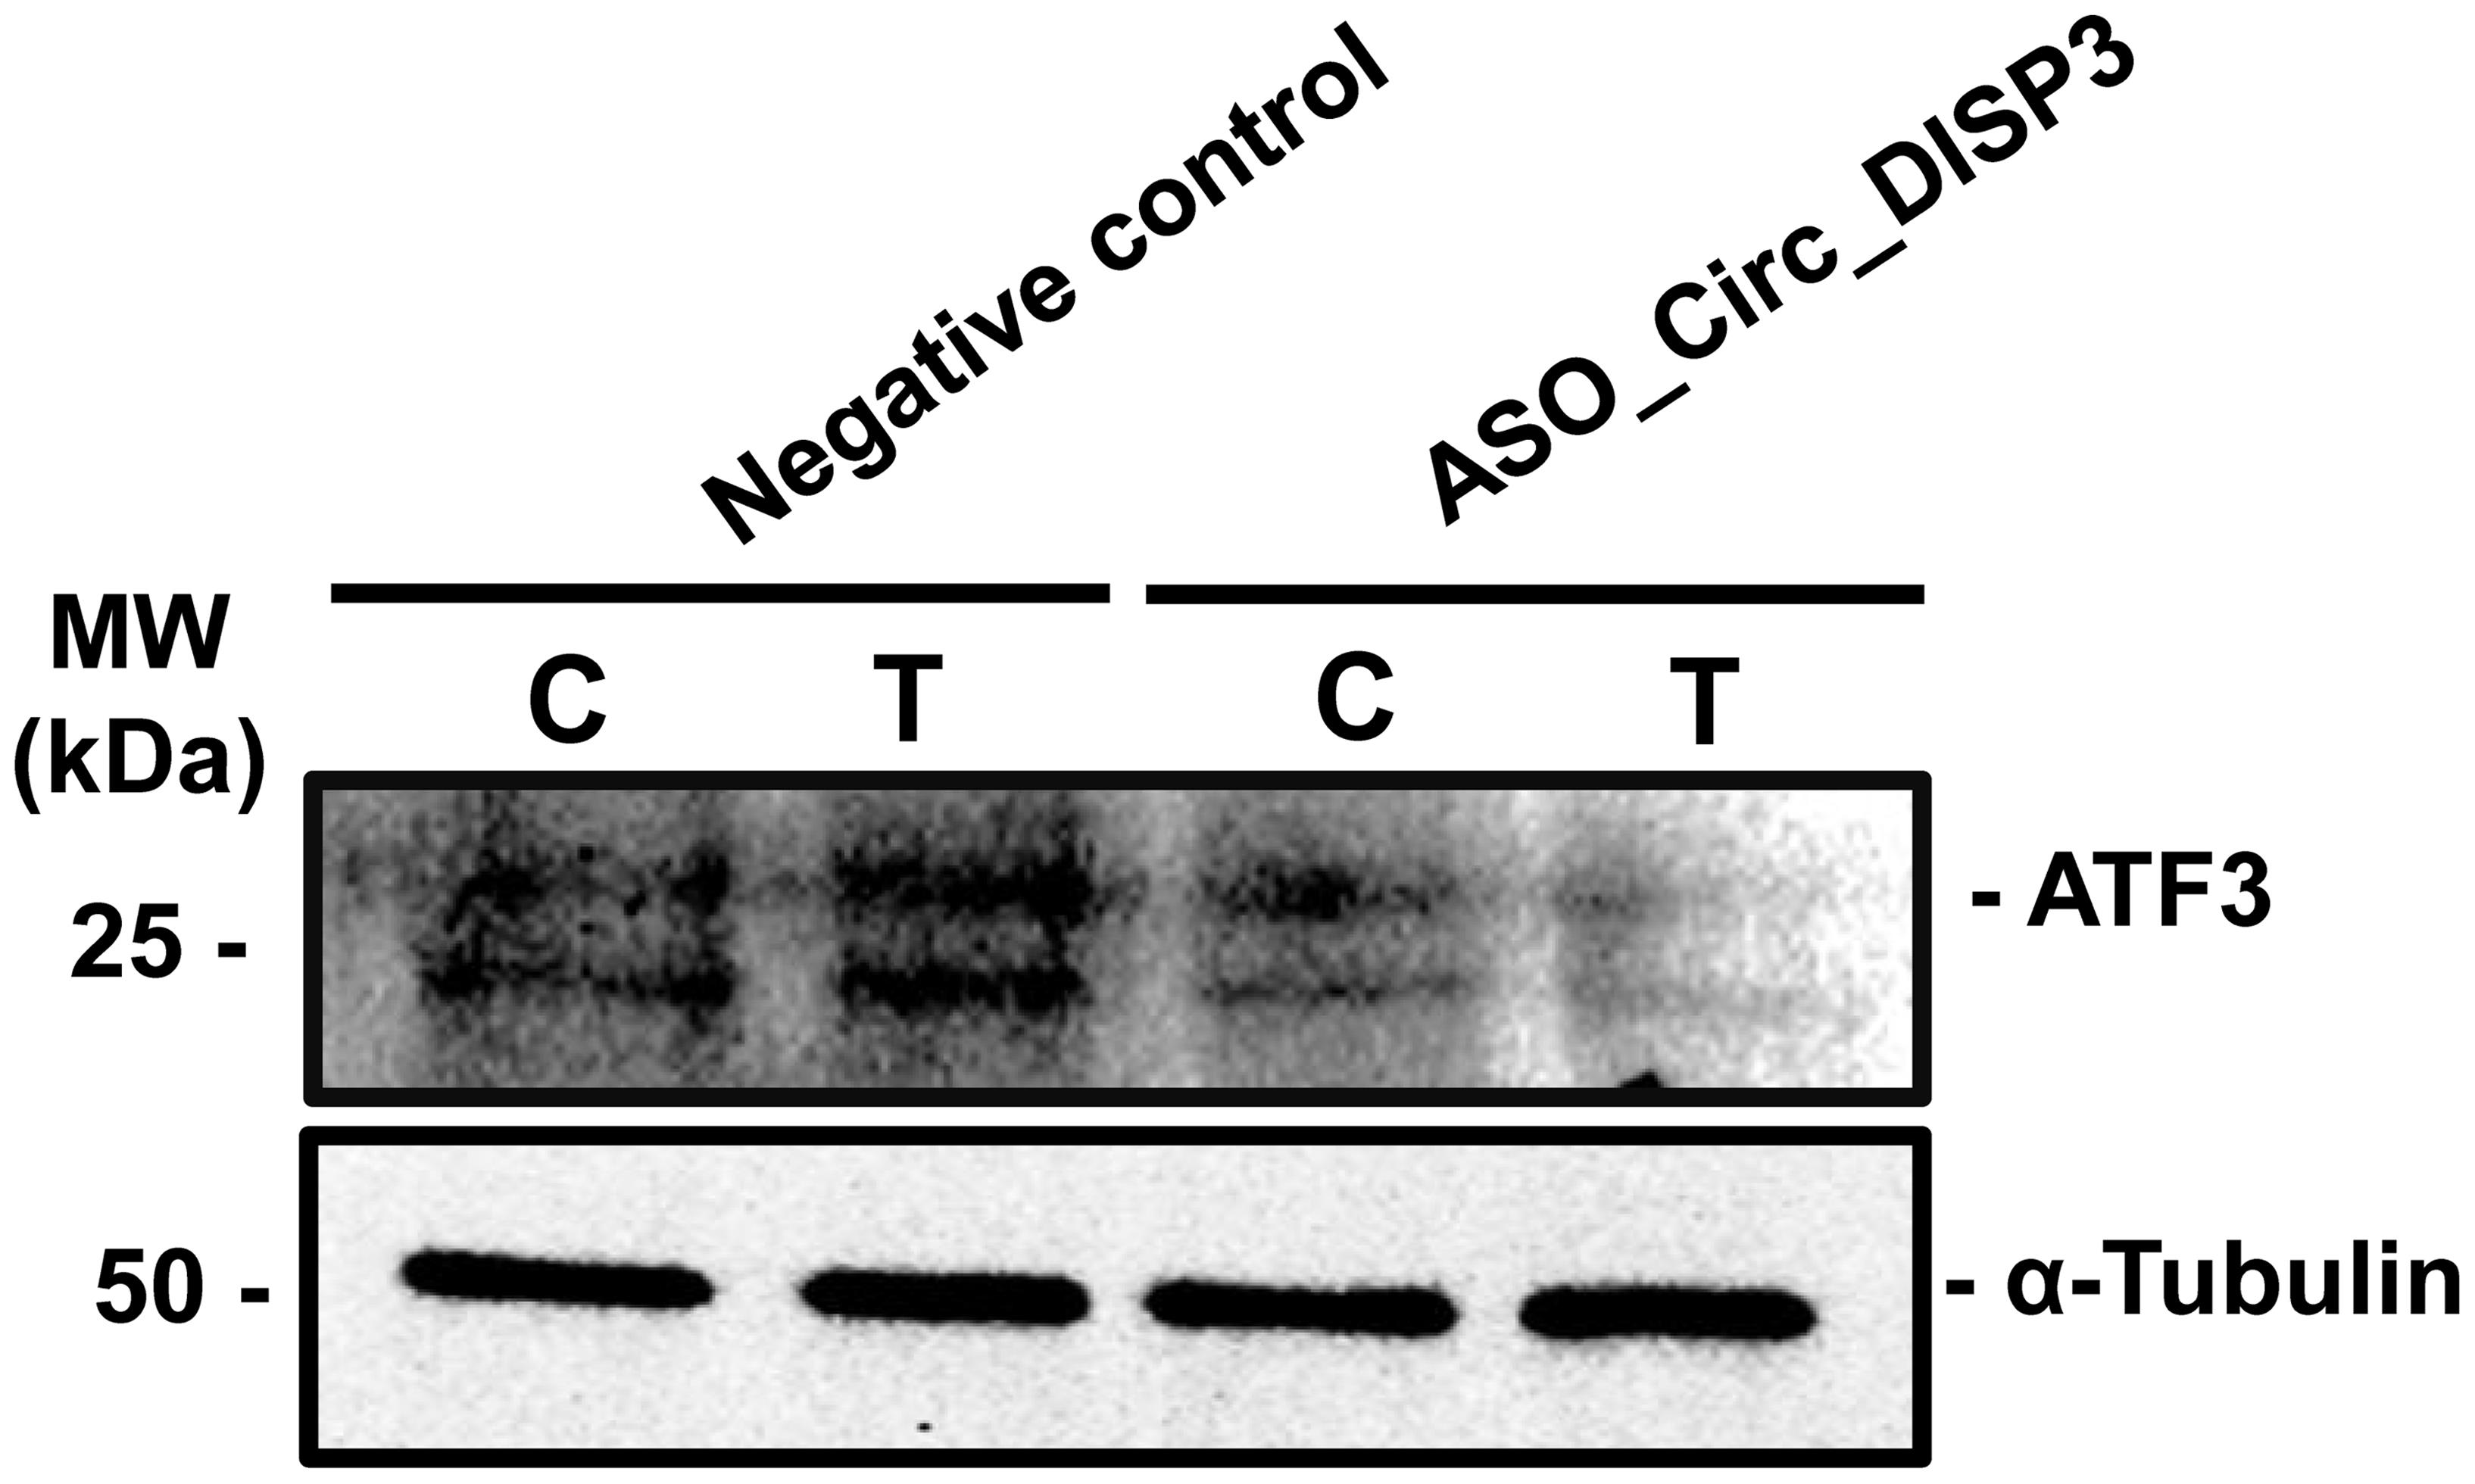 ASO-mediated silencing of circ_DISP3 decreased TGF-β1-stimulated ATF3 expression in hBC cells.